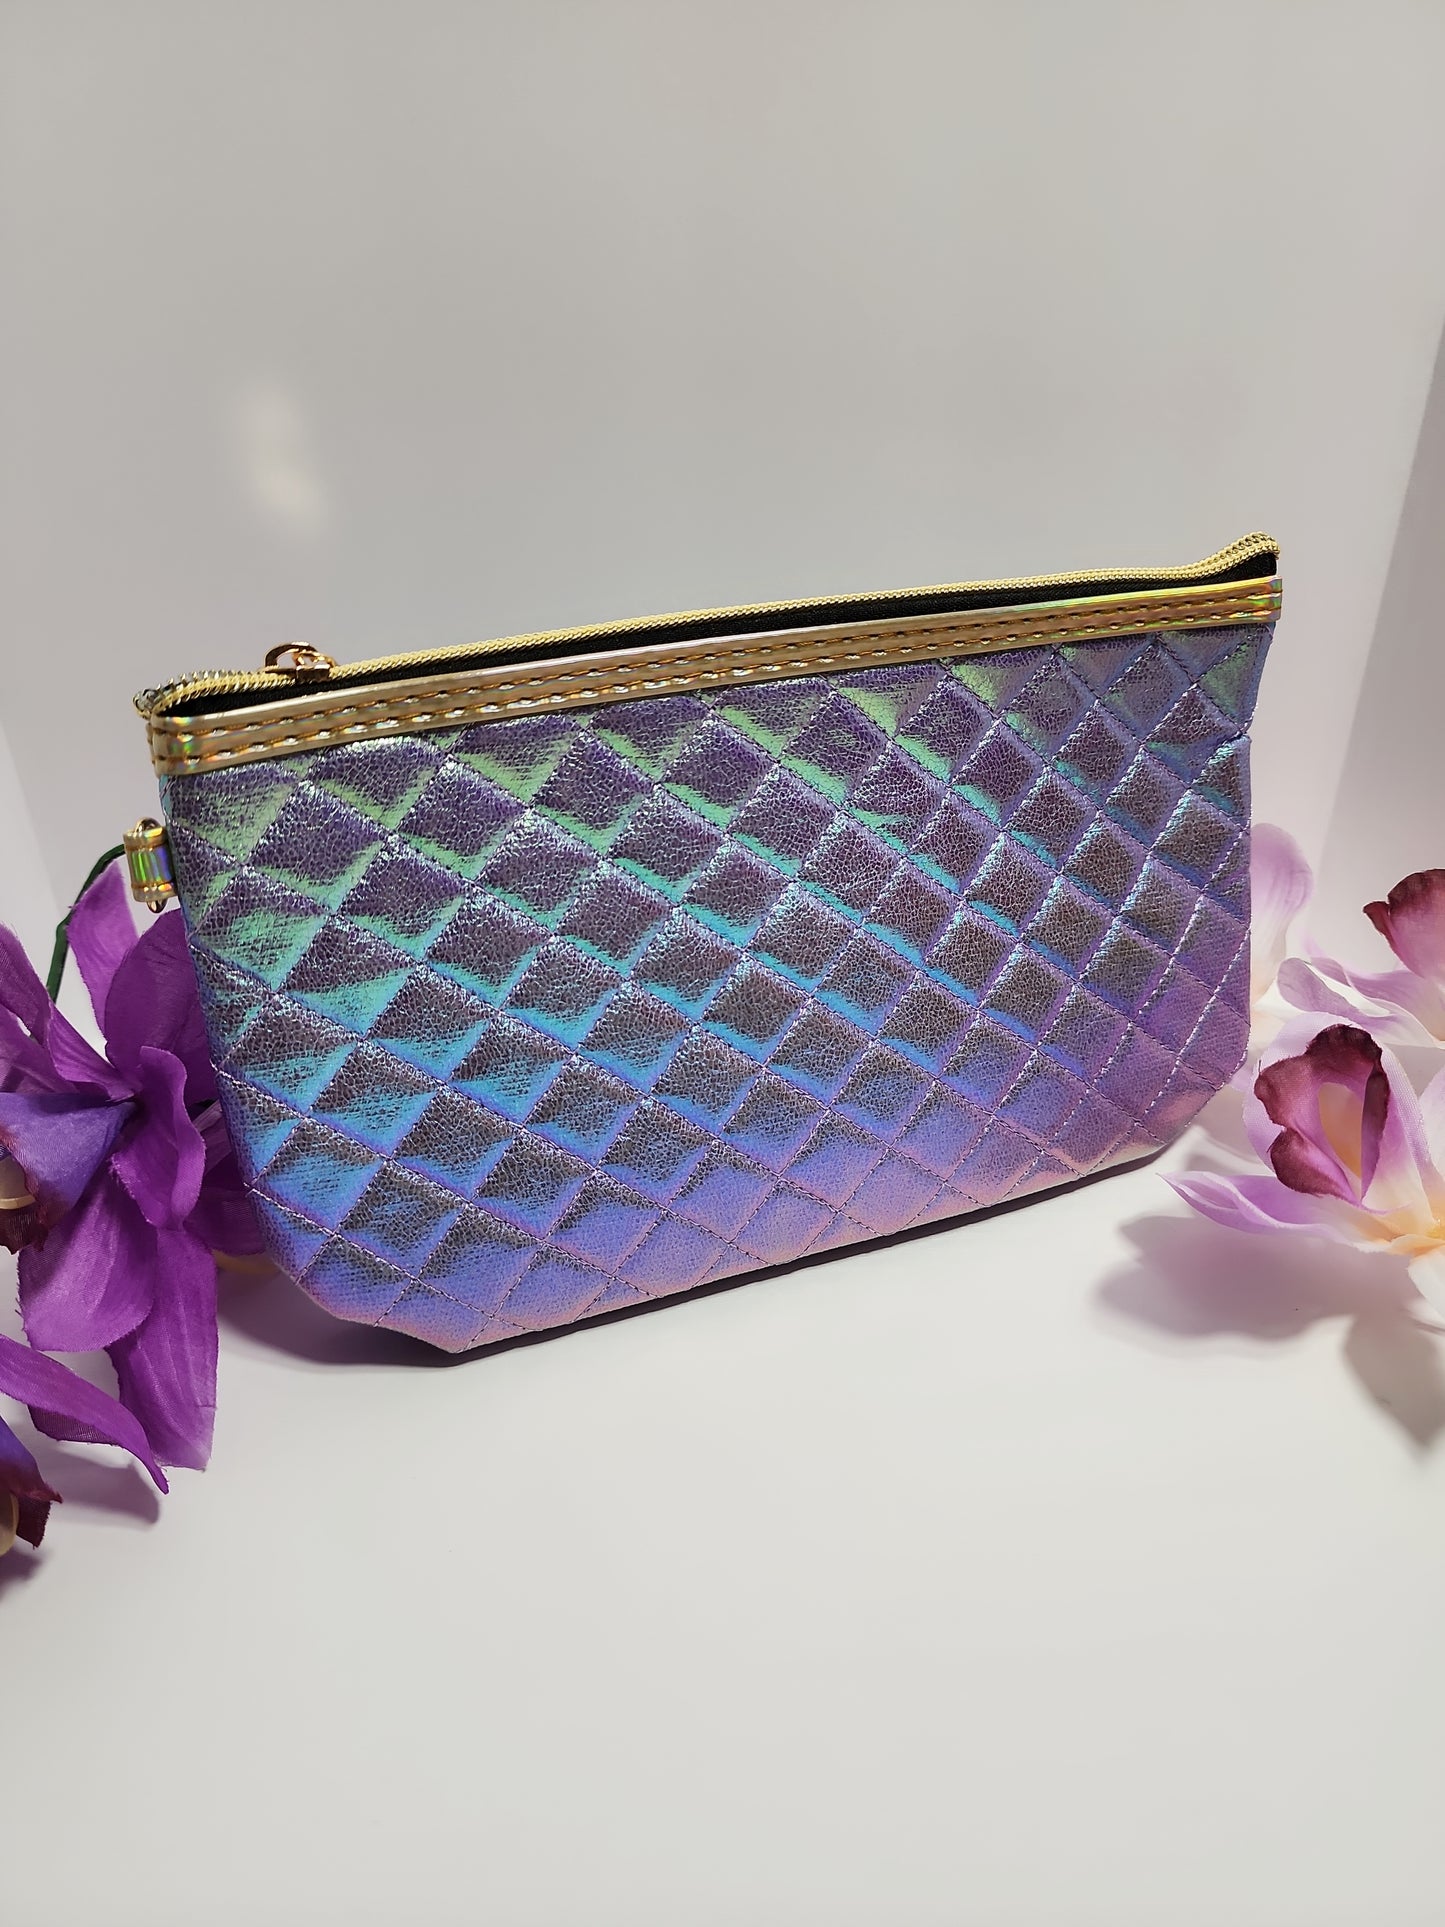 Holographic Reflective Clutch Makeup Bag - So cute!